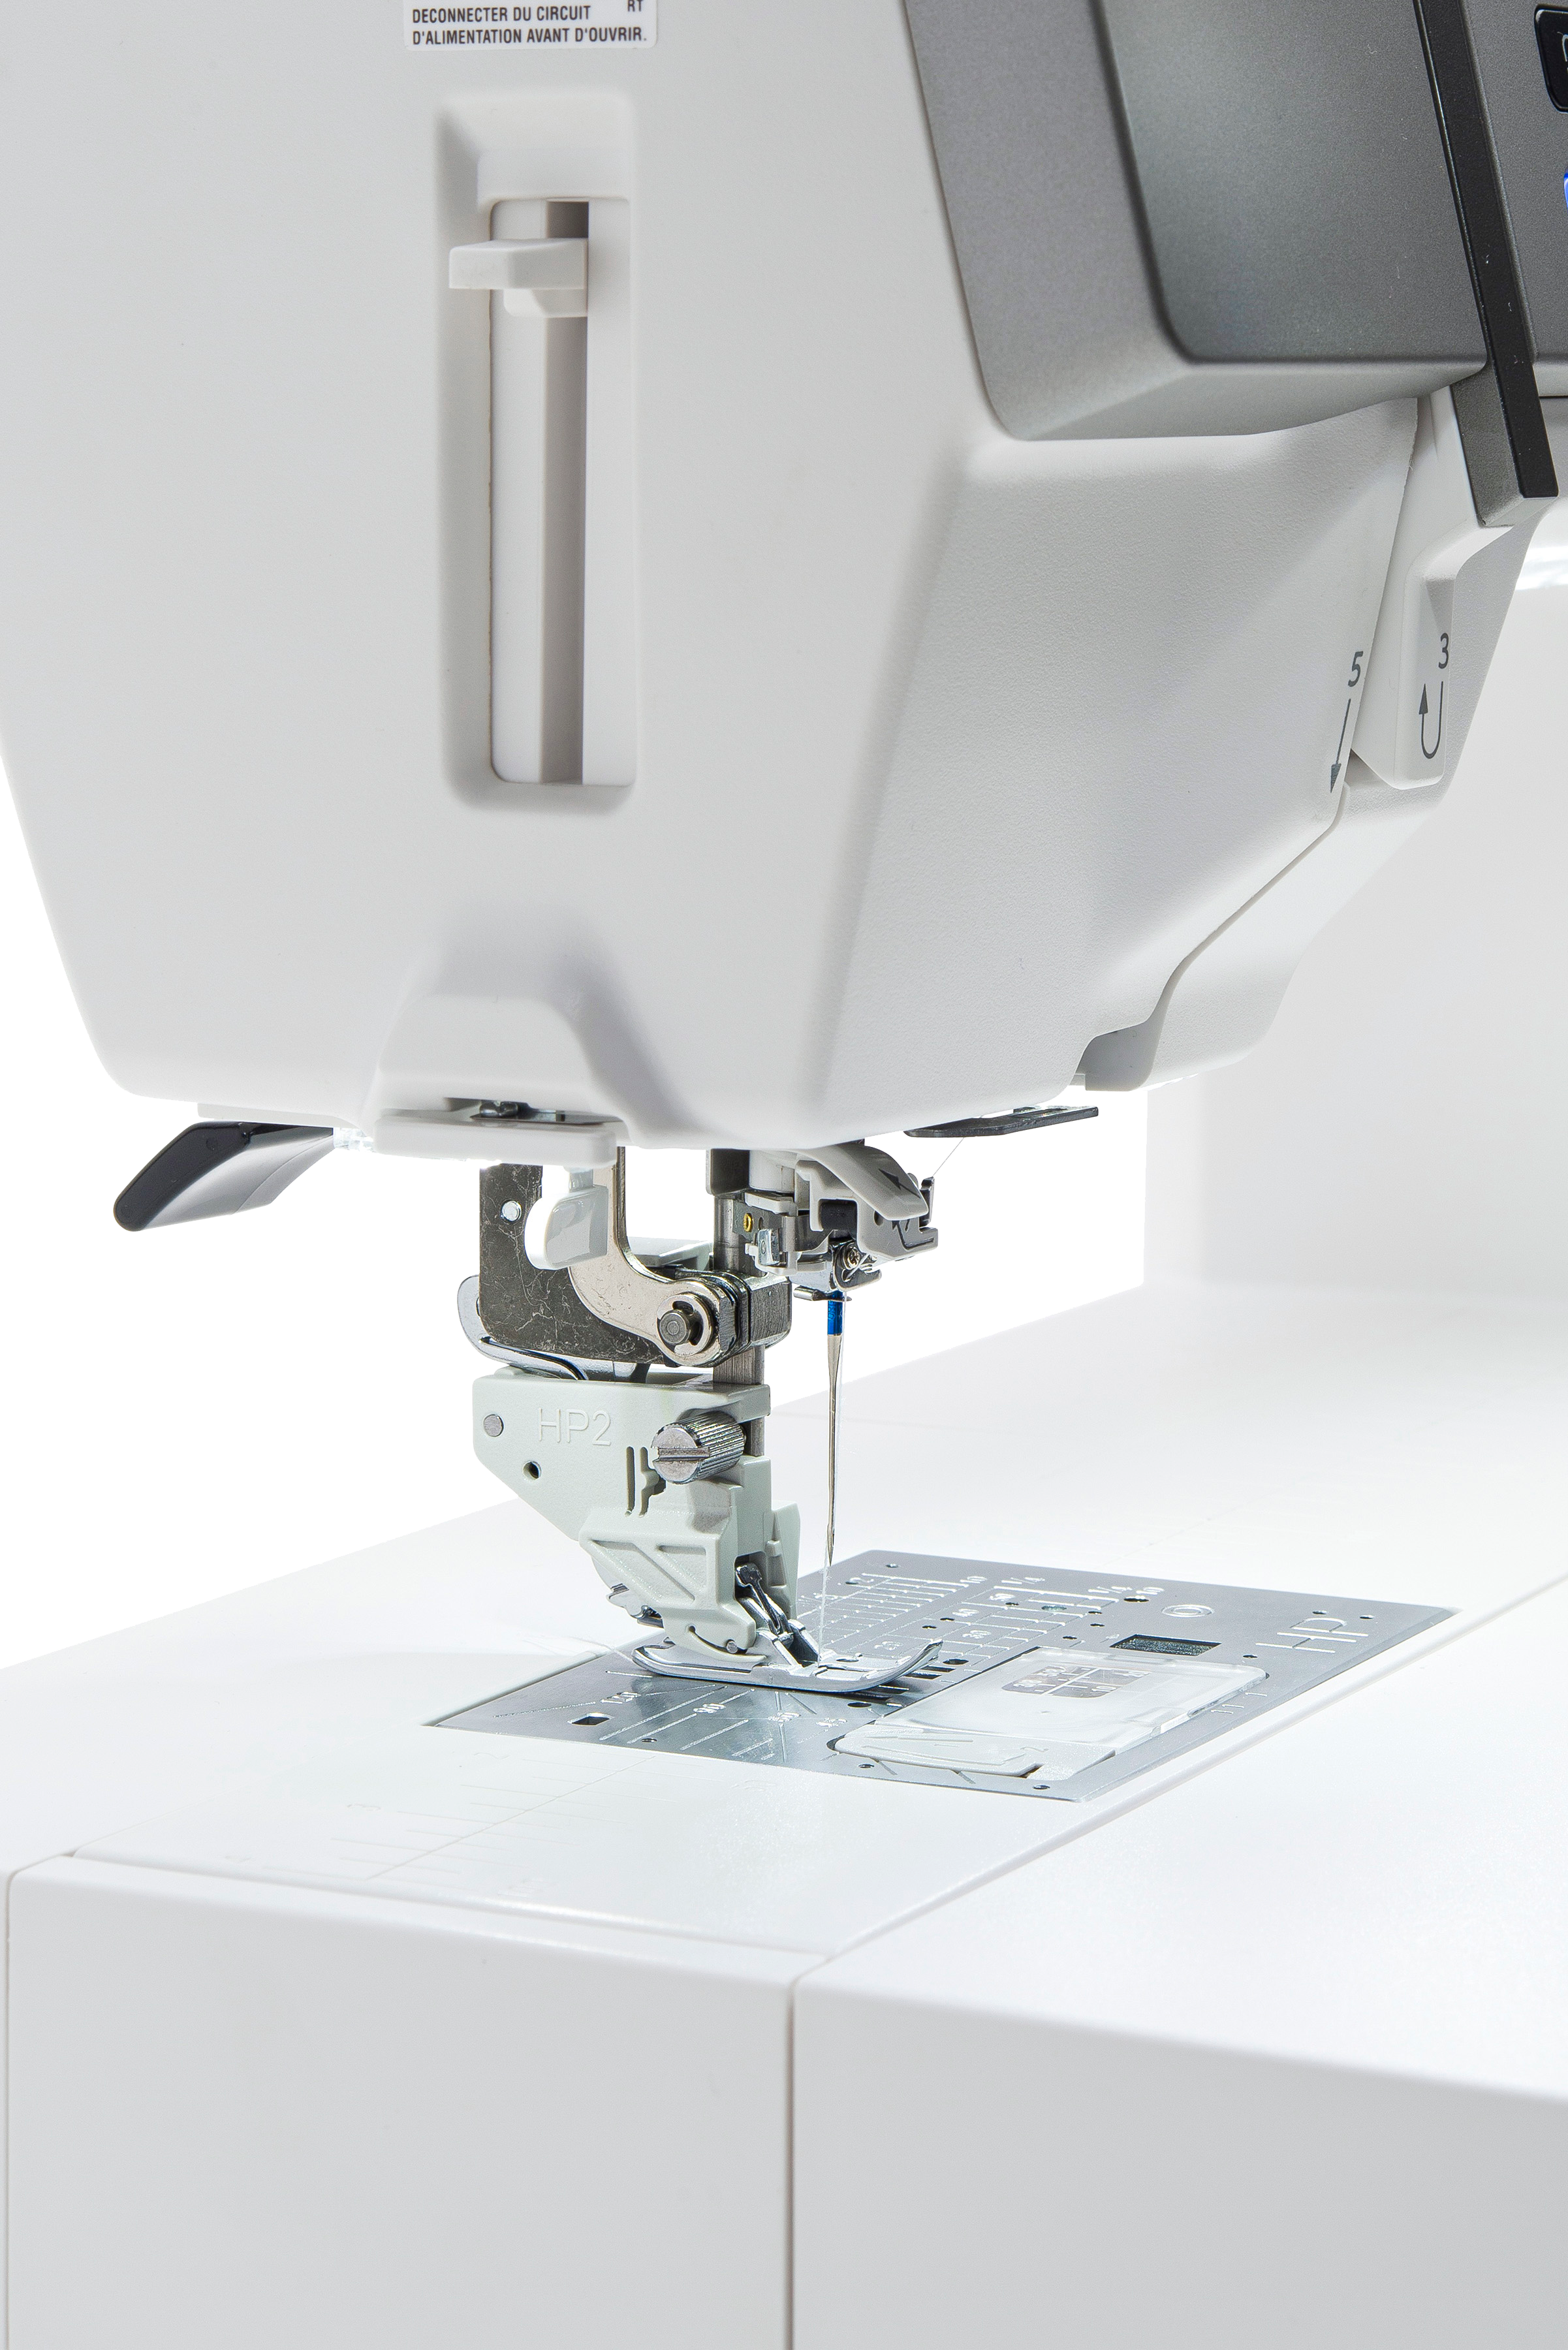 Janome Horizon Memory Craft 9480QCP Sewing Machine for Sale at World Weidner